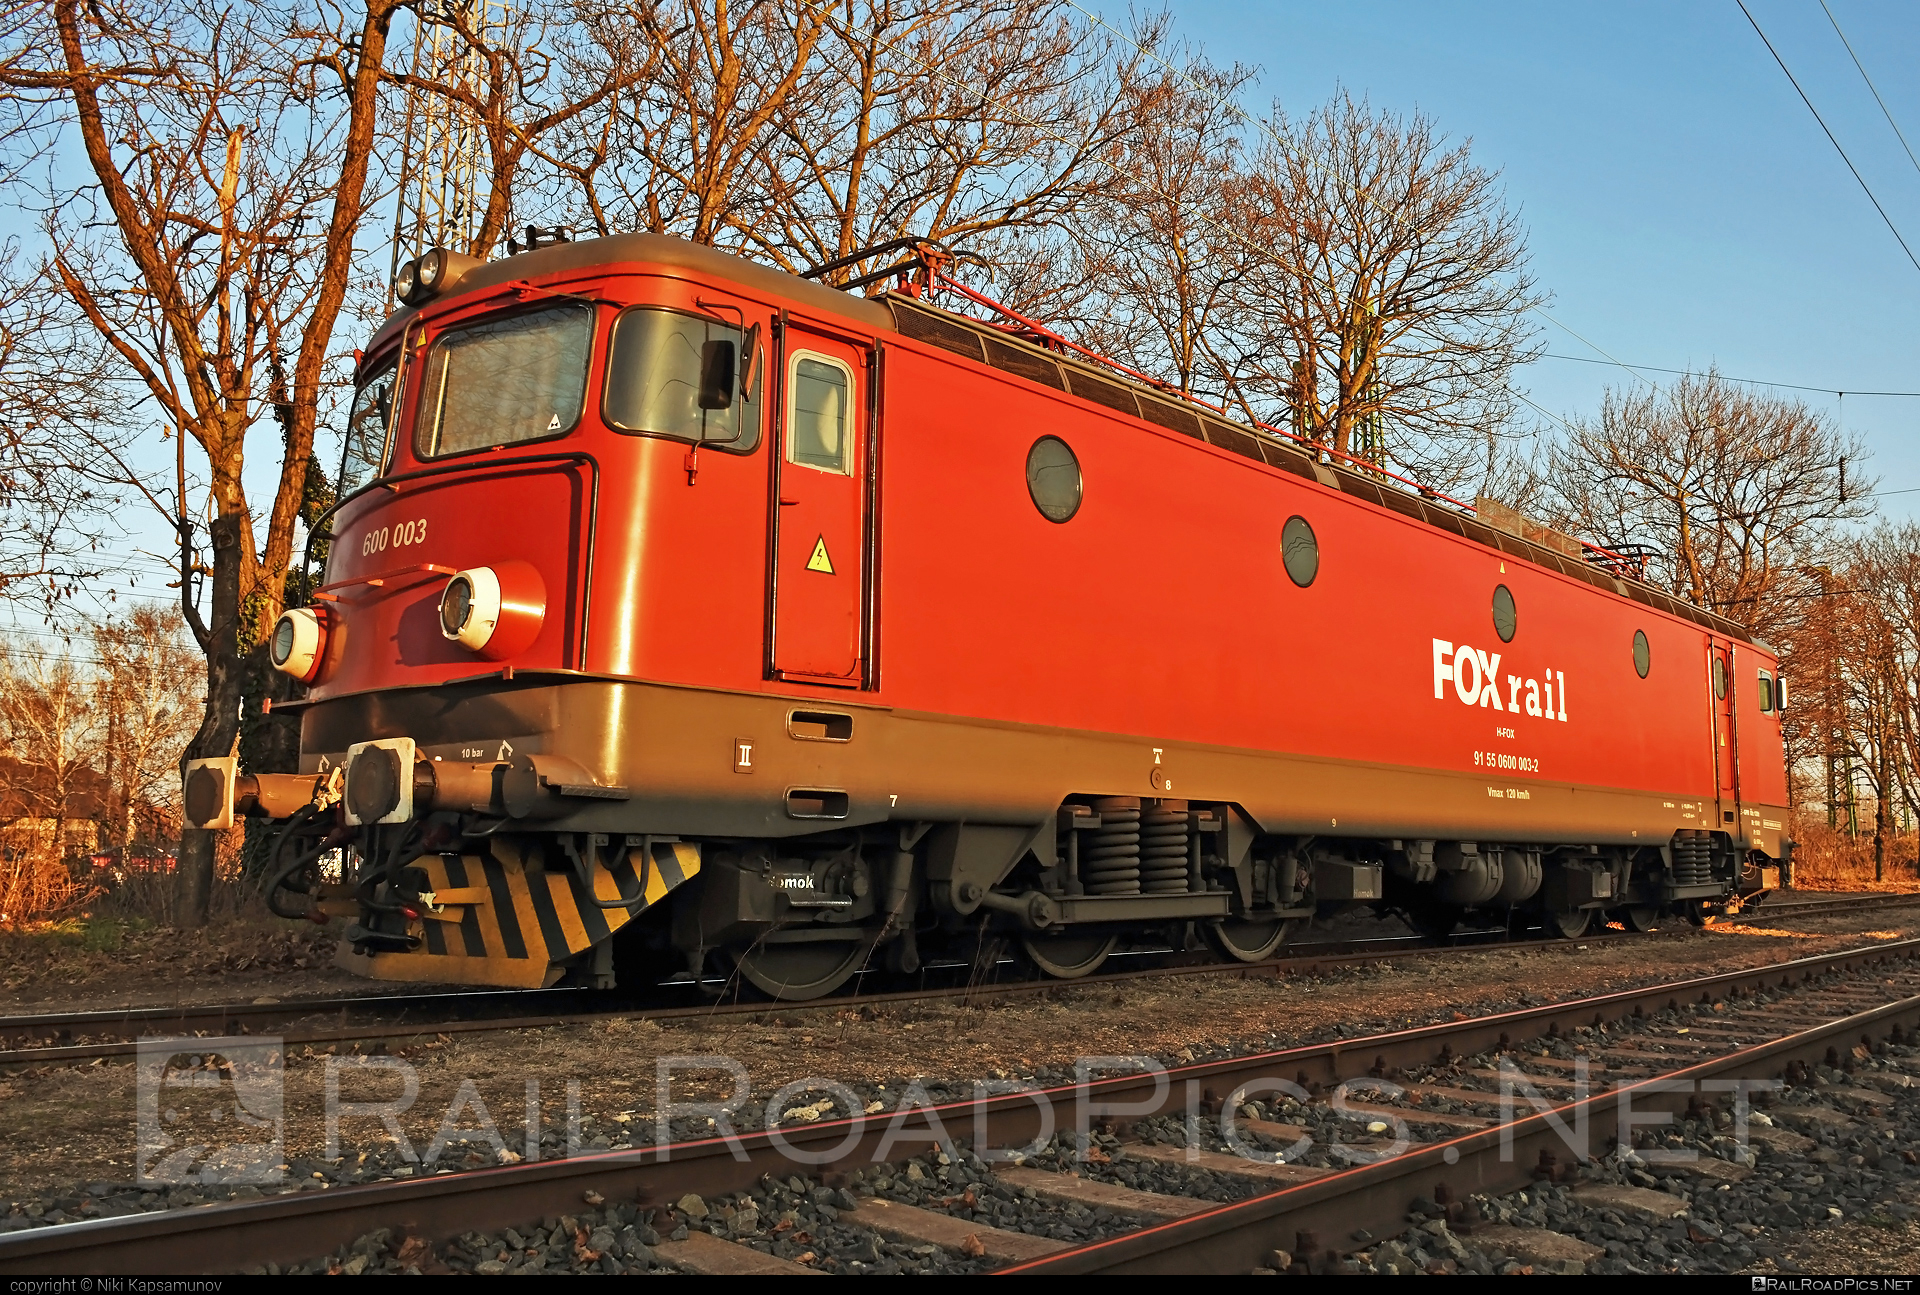 Electroputere LE 5100 - 600 003 operated by FOXrail Zrt. #electroputere #electroputerecraiova #electroputerele5100 #fox #foxrail #le5100